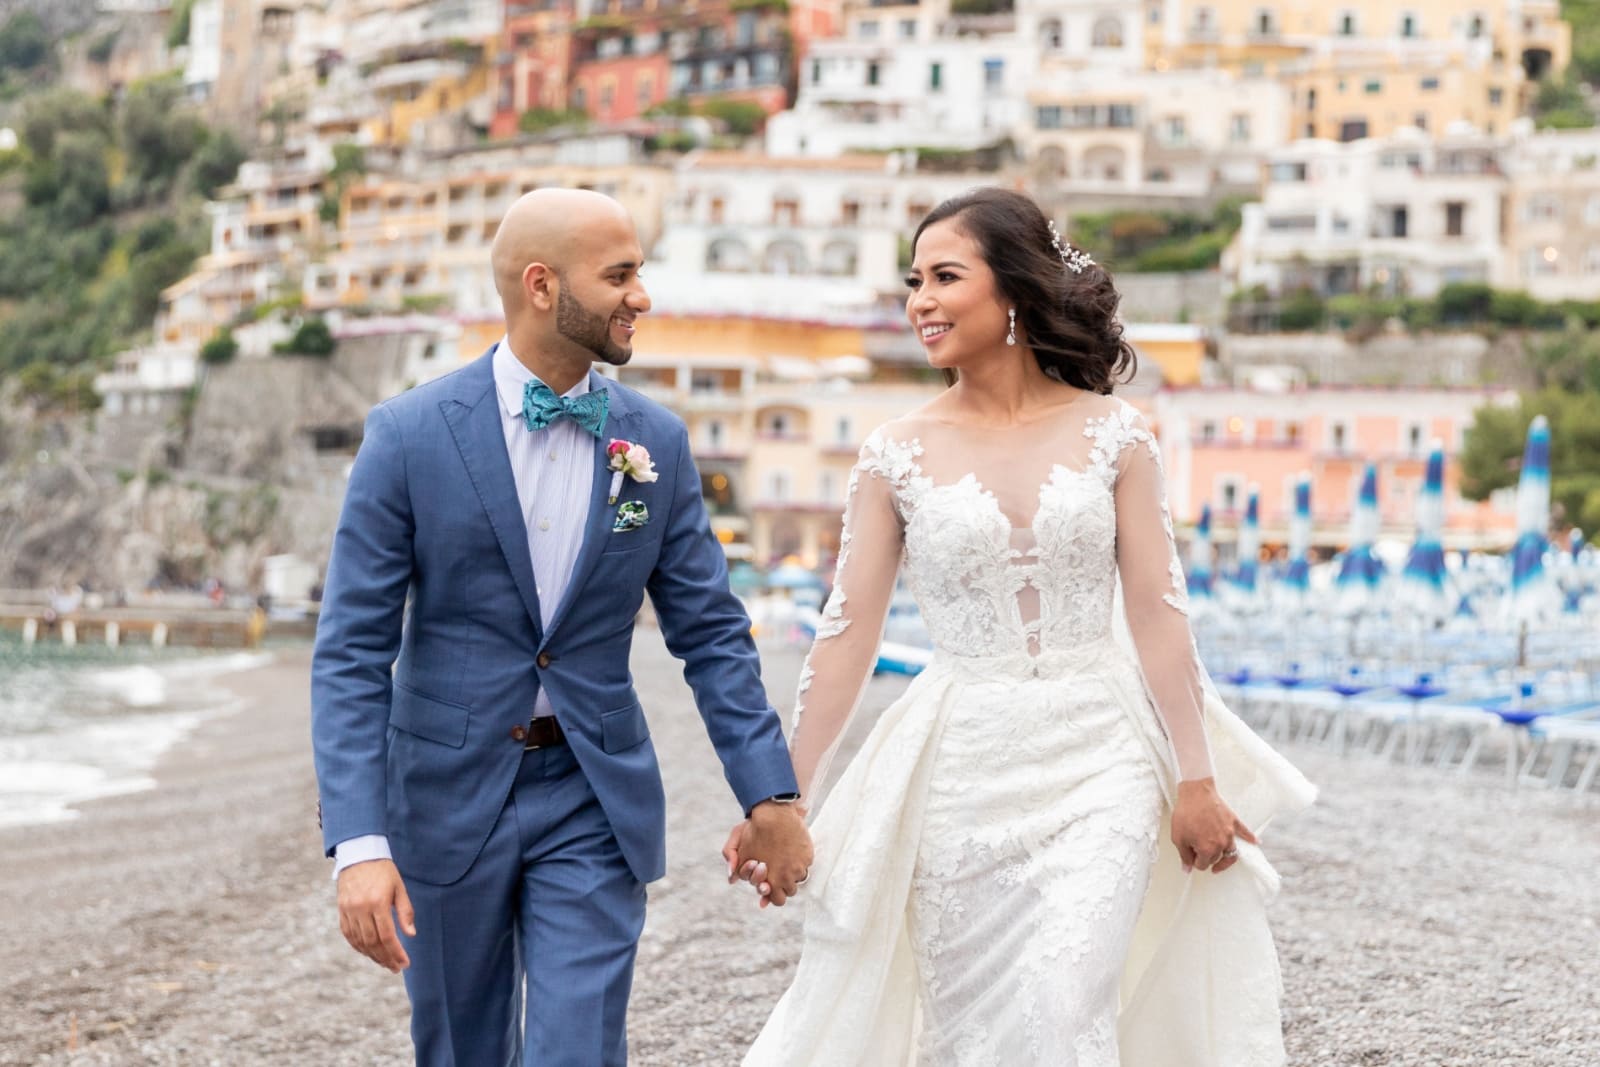 This Wedding in Positano Highlights the Region's Natural Beauty - Destination  Wedding Details